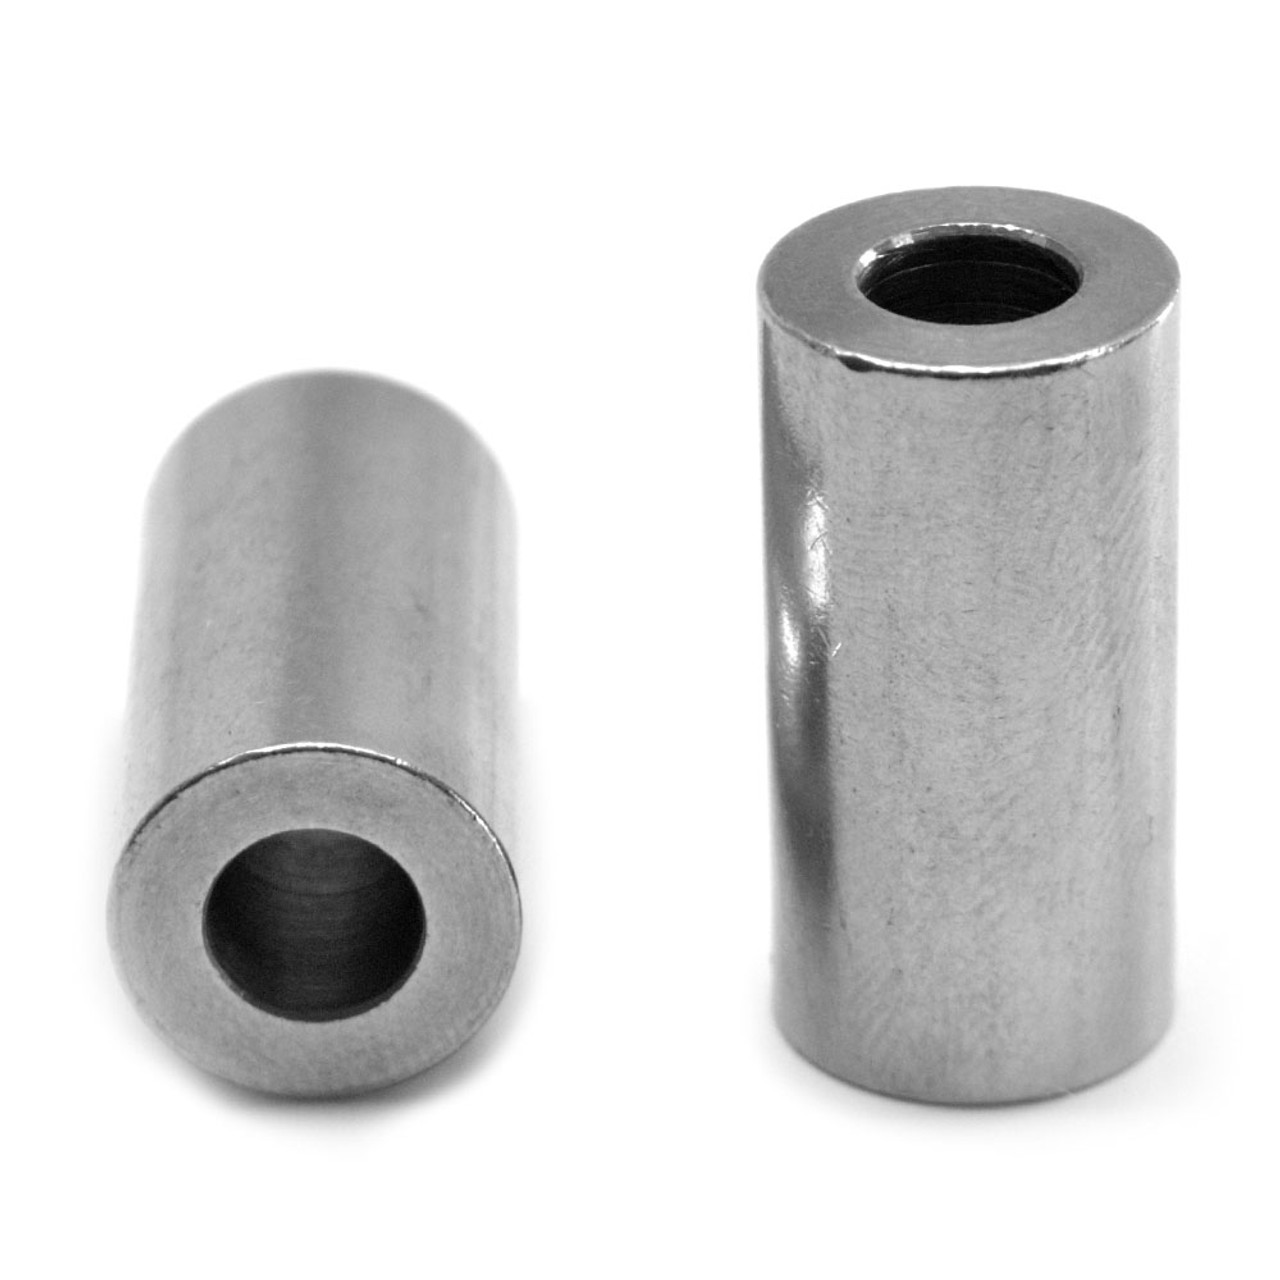 #14 x 15/16" x 1/2" OD Round Spacer Stainless Steel 18-8